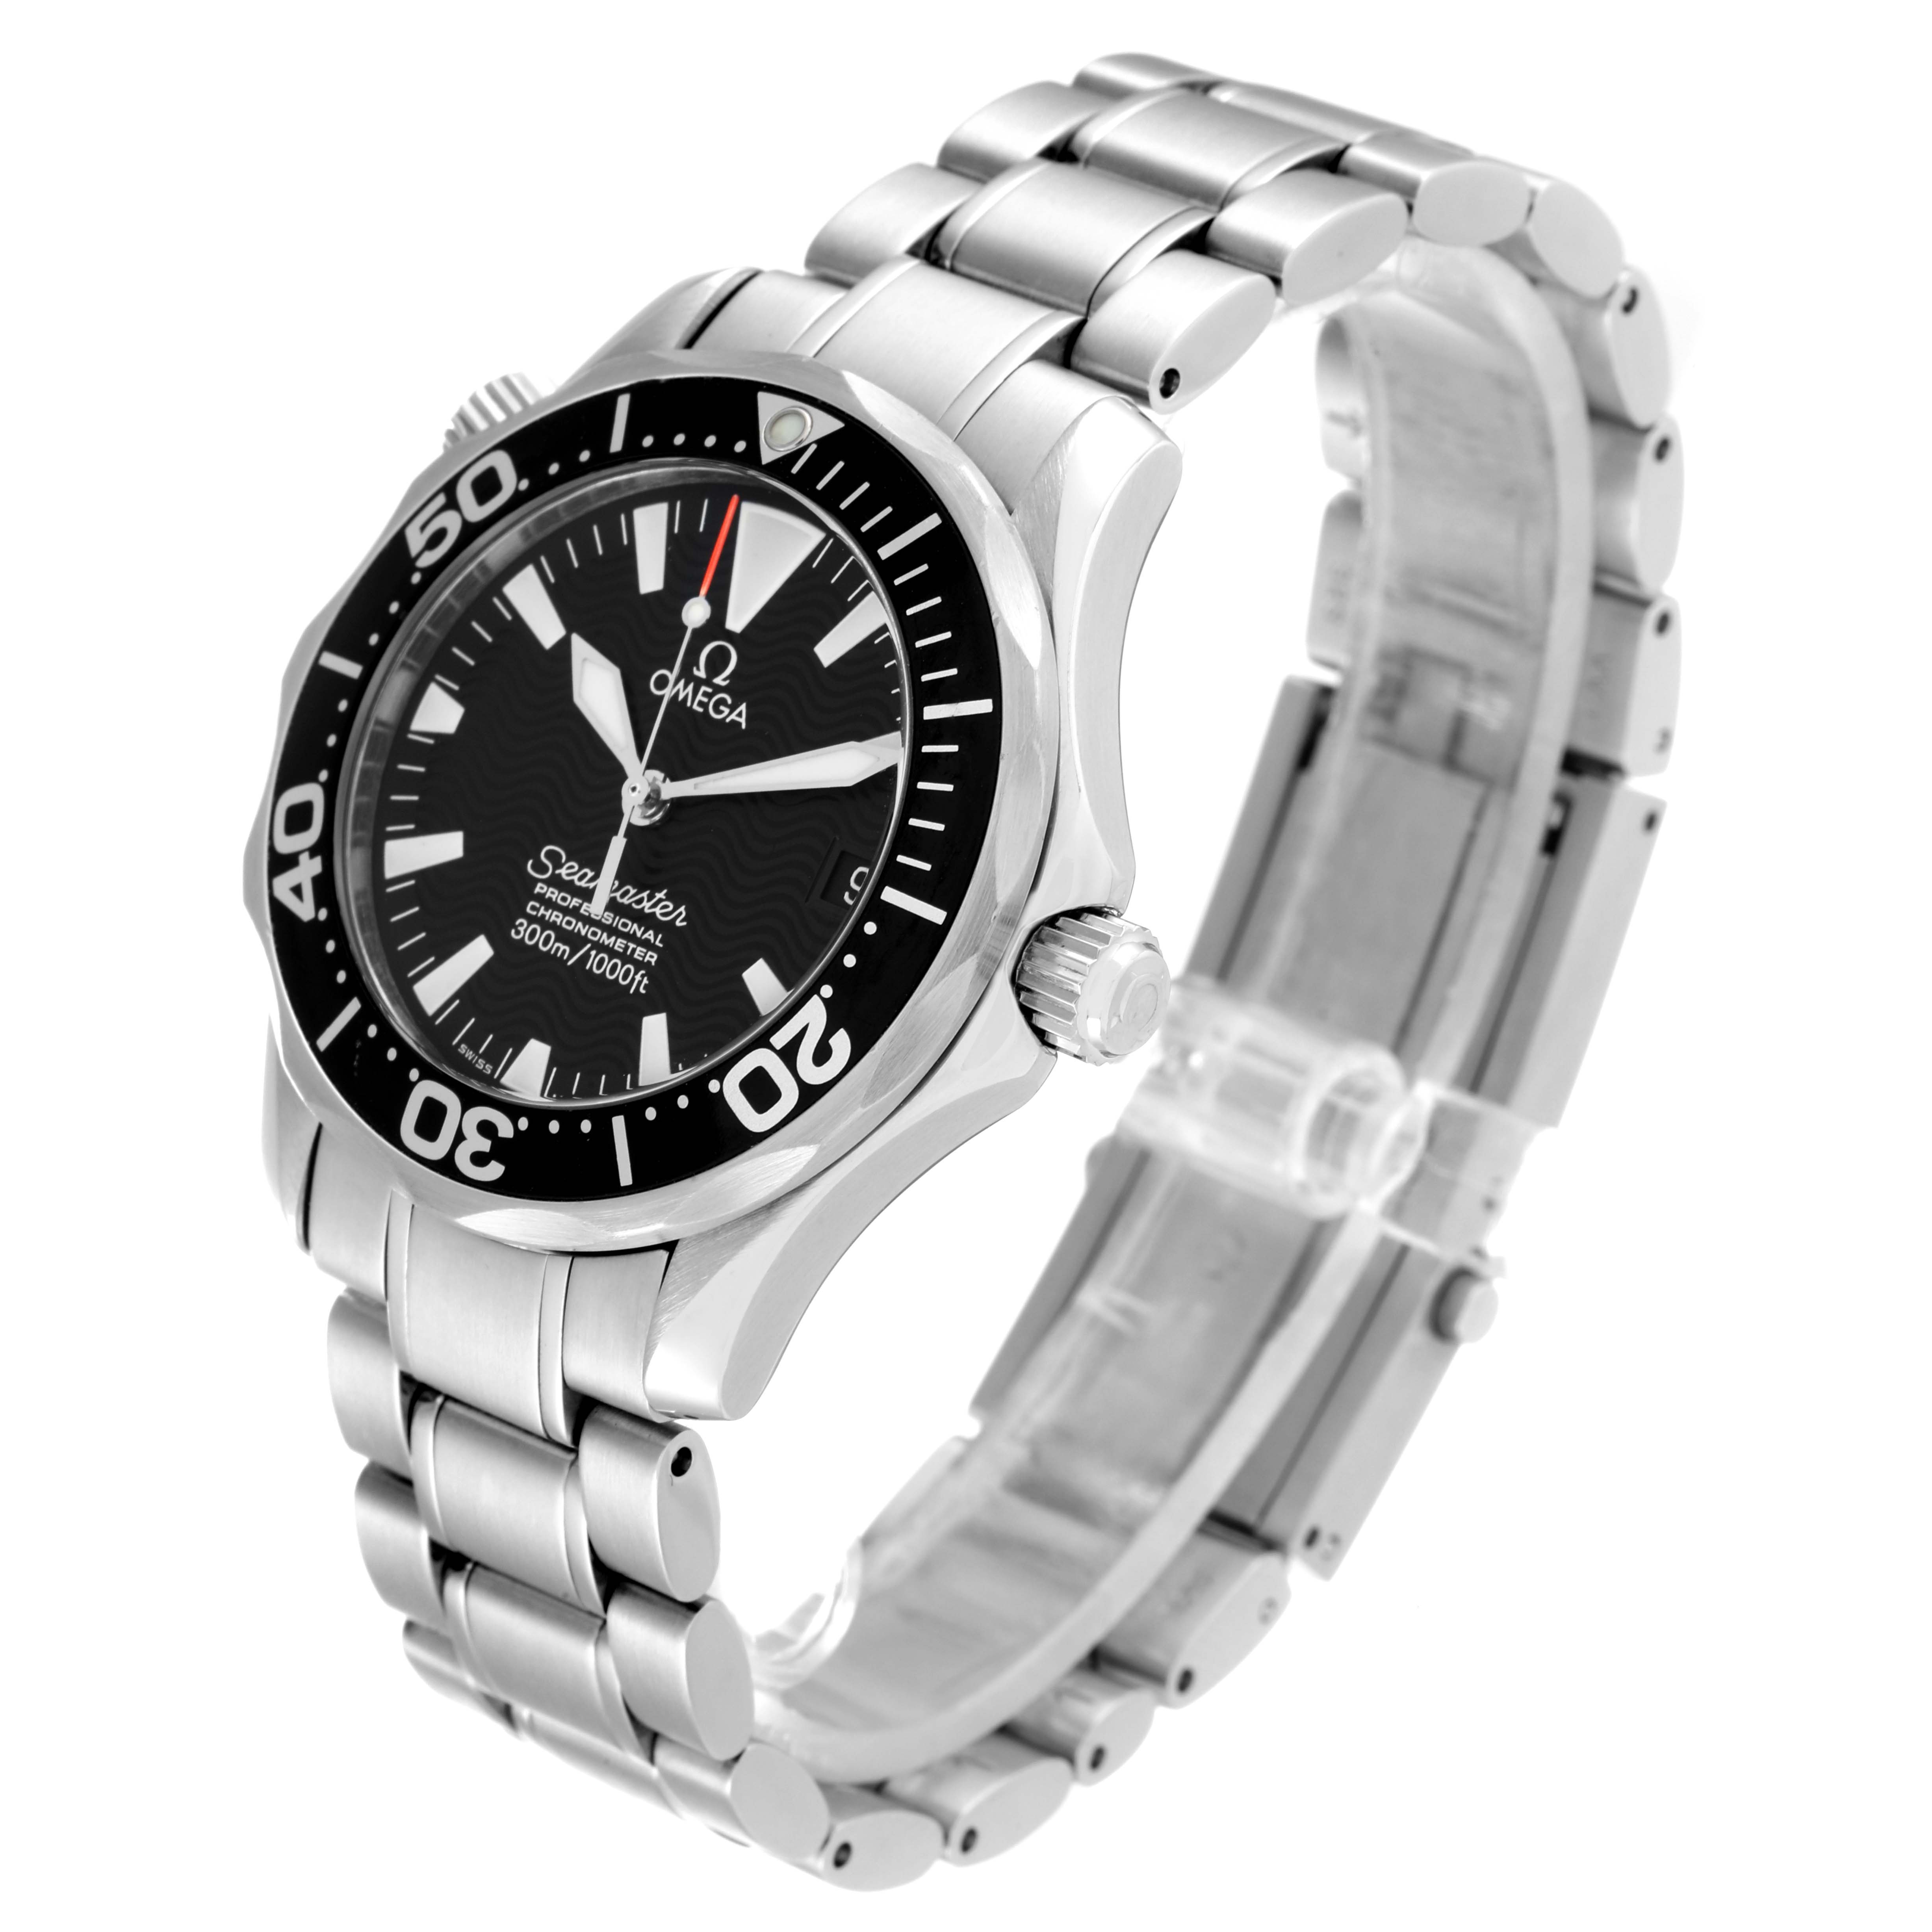 Omega Seamaster 36mm Midsize Black Wave Dial Steel Watch 2252.50.00 ...